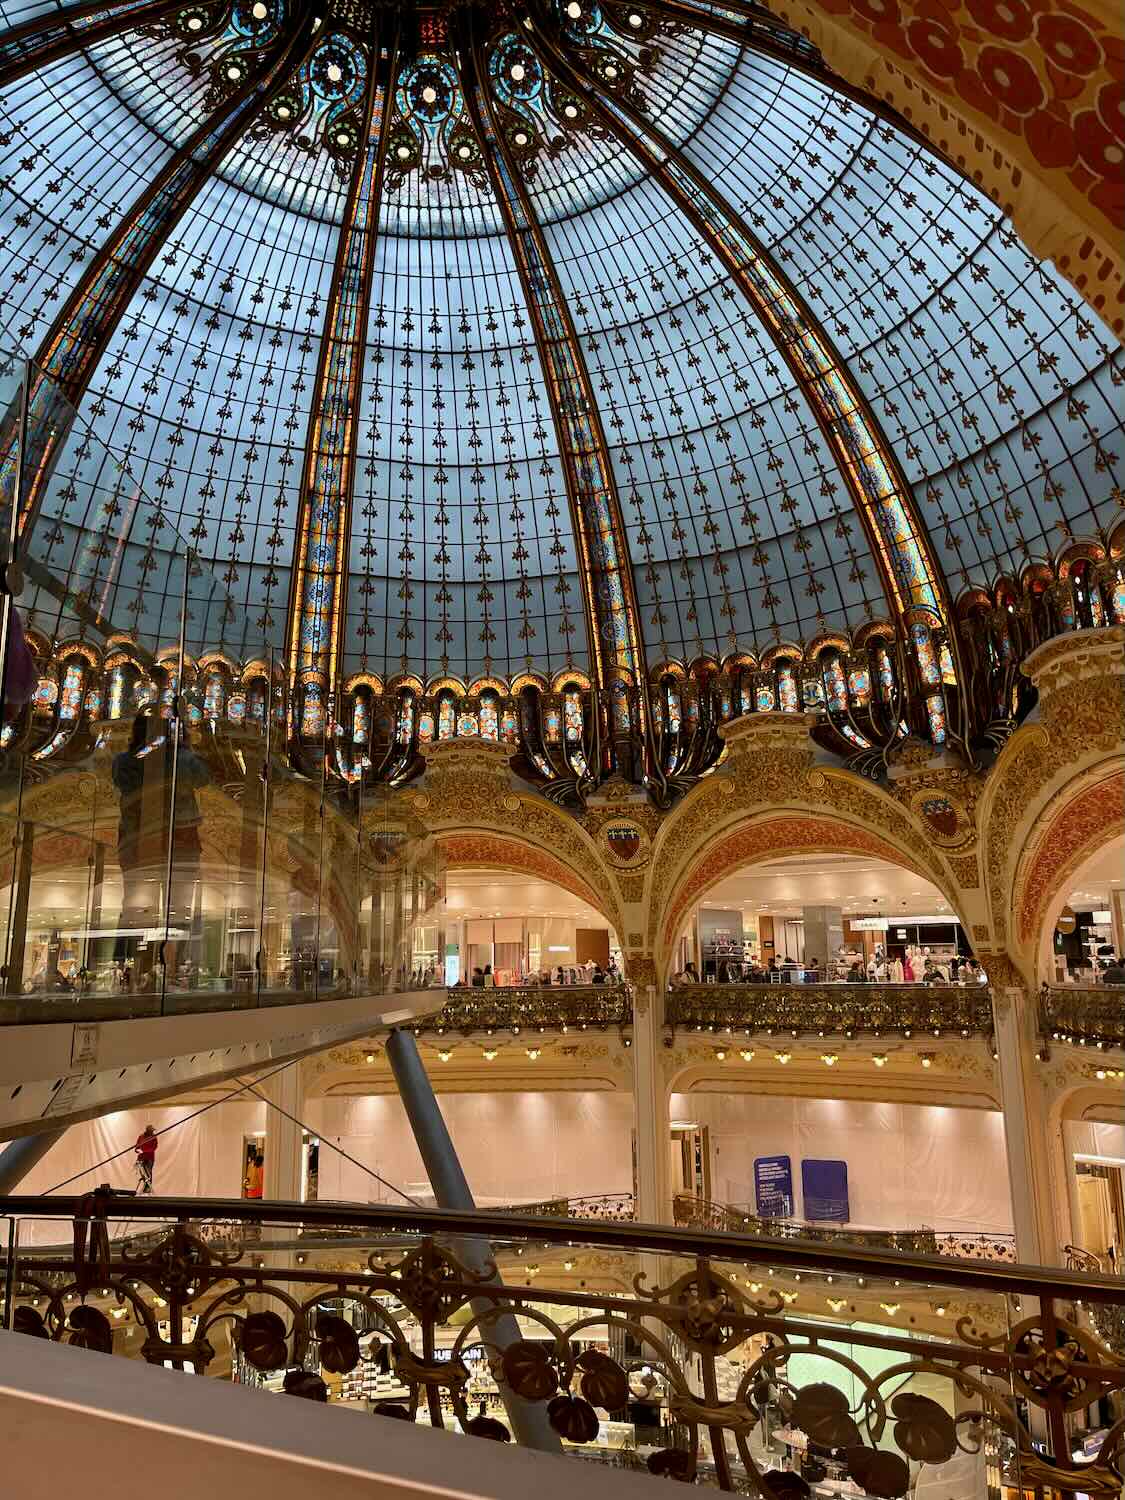 tunning interior of the Galeries Lafayette, highlighting its famous stained glass dome and elaborate balconies. The design elements and colors create a rich, opulent atmosphere inside this renowned Parisian department store.